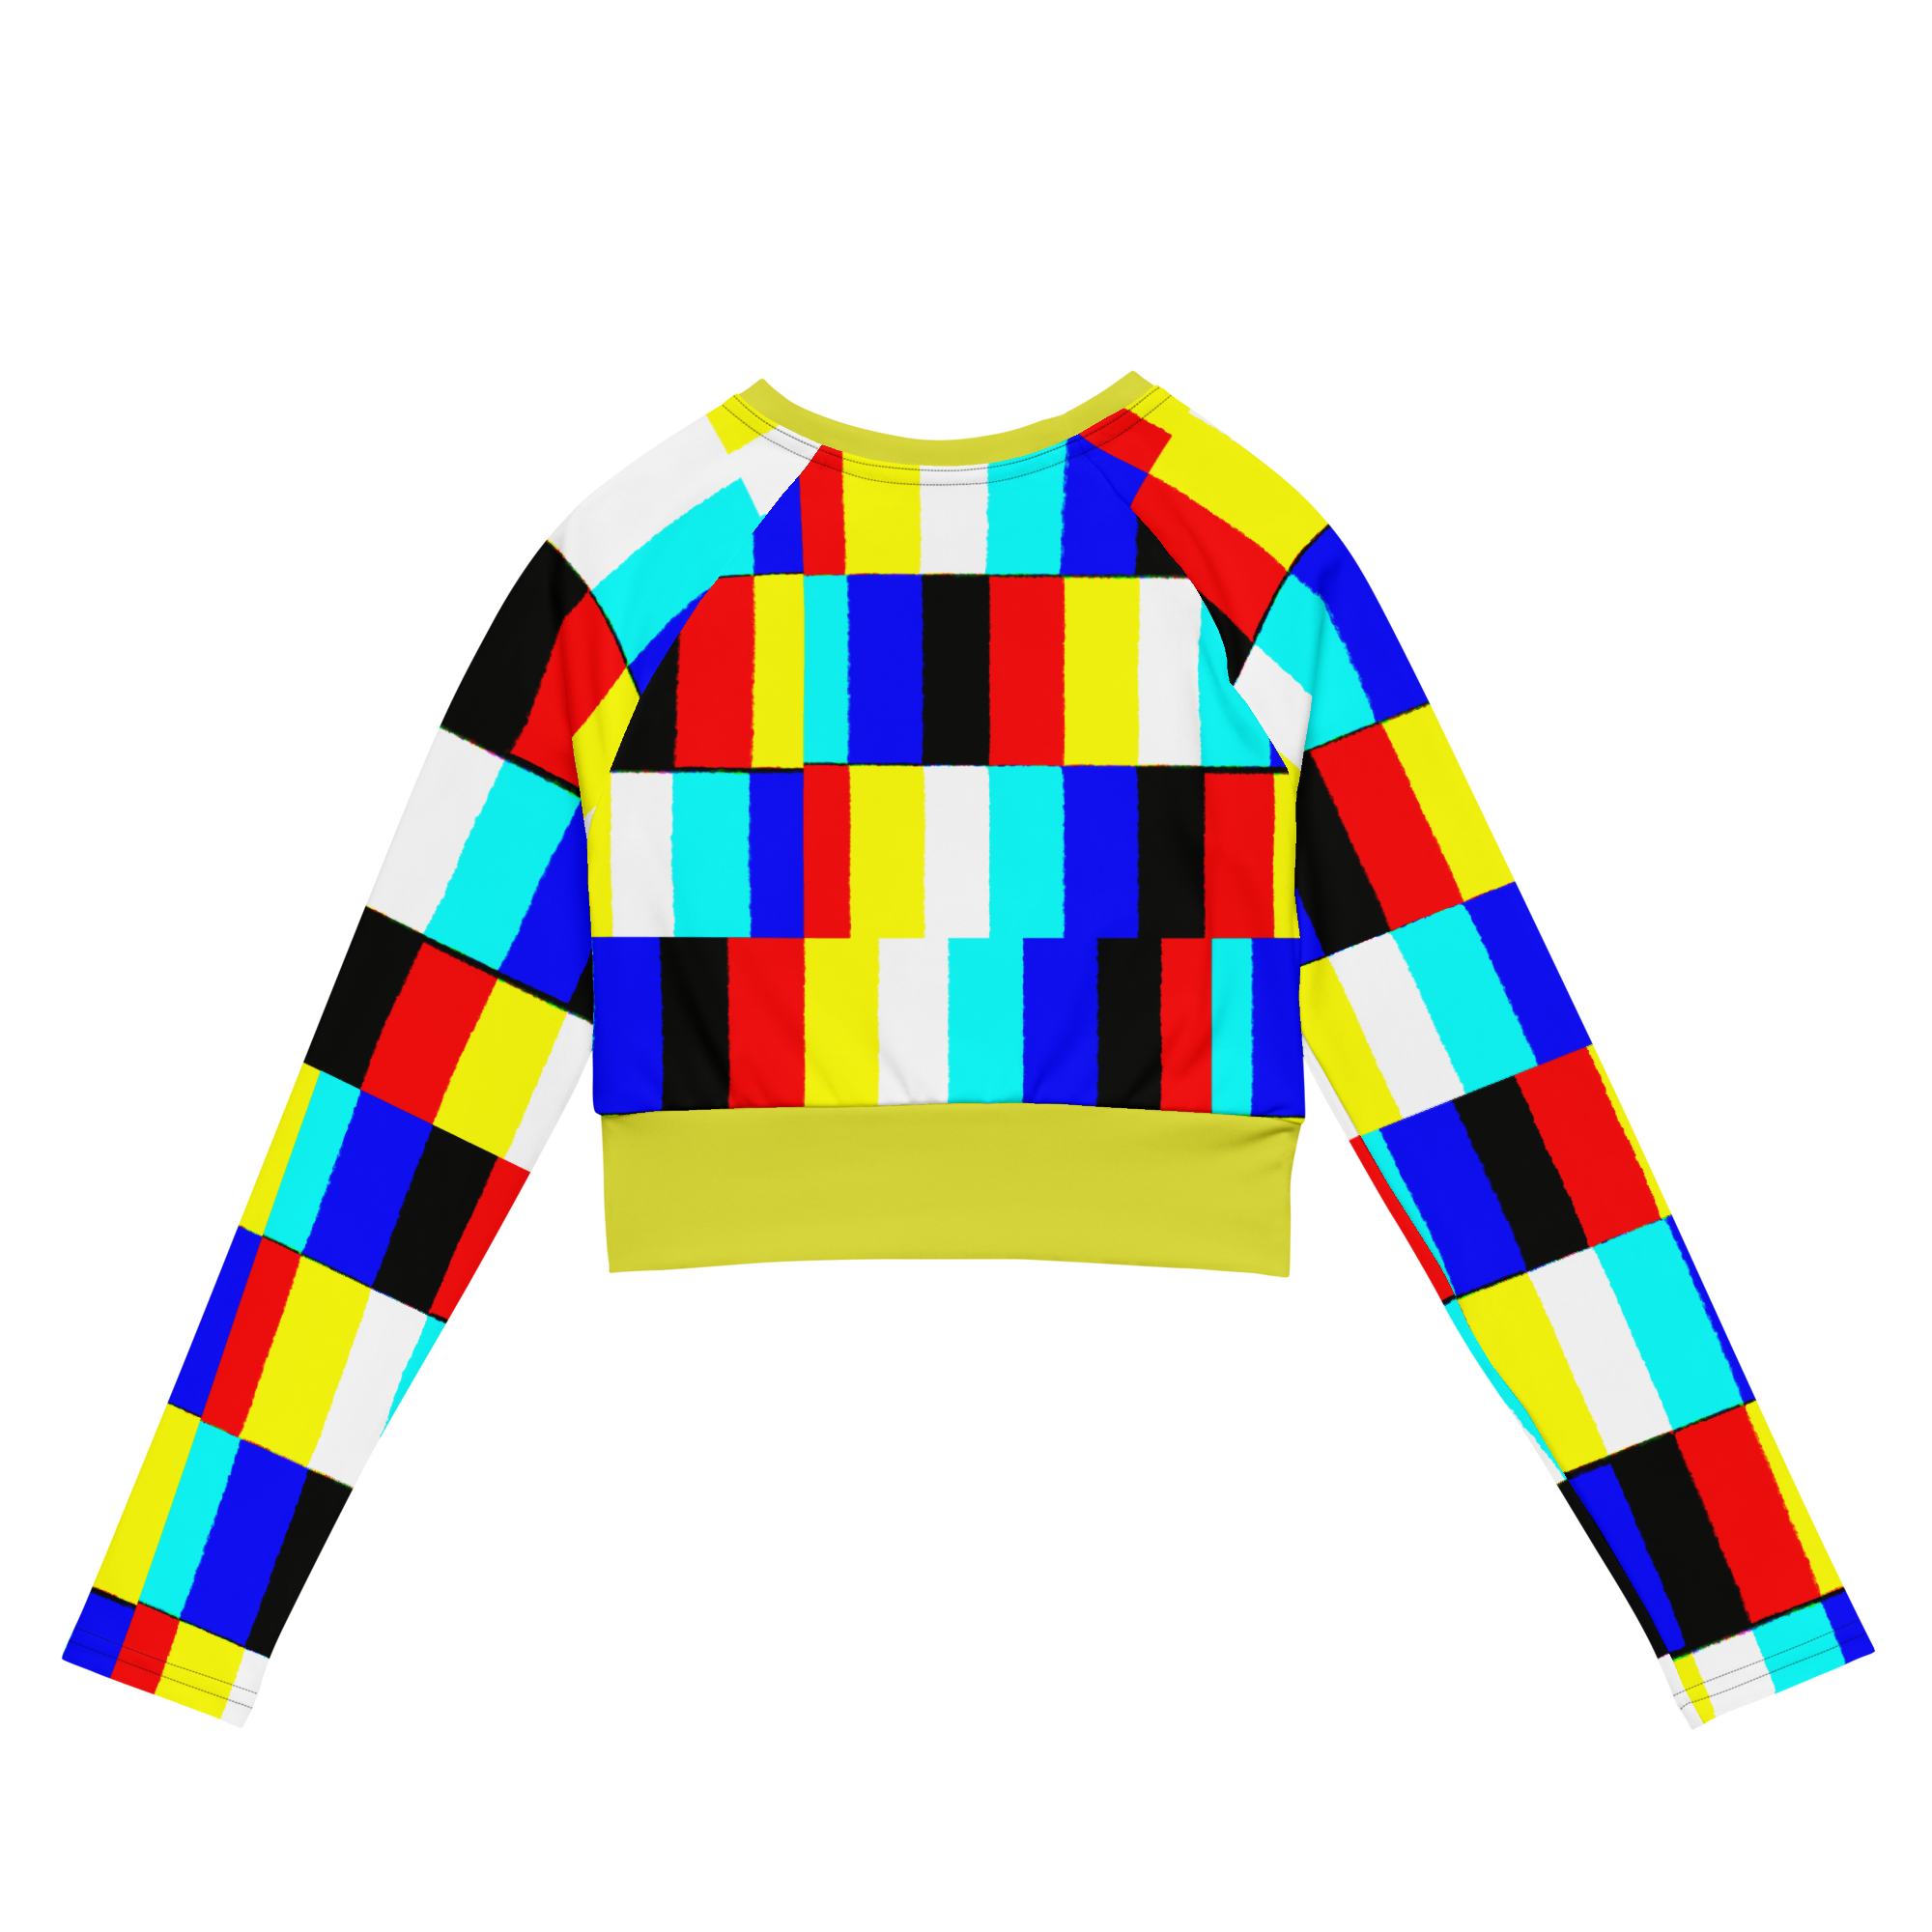 Glitch long-sleeve crop top (yellow contrast)